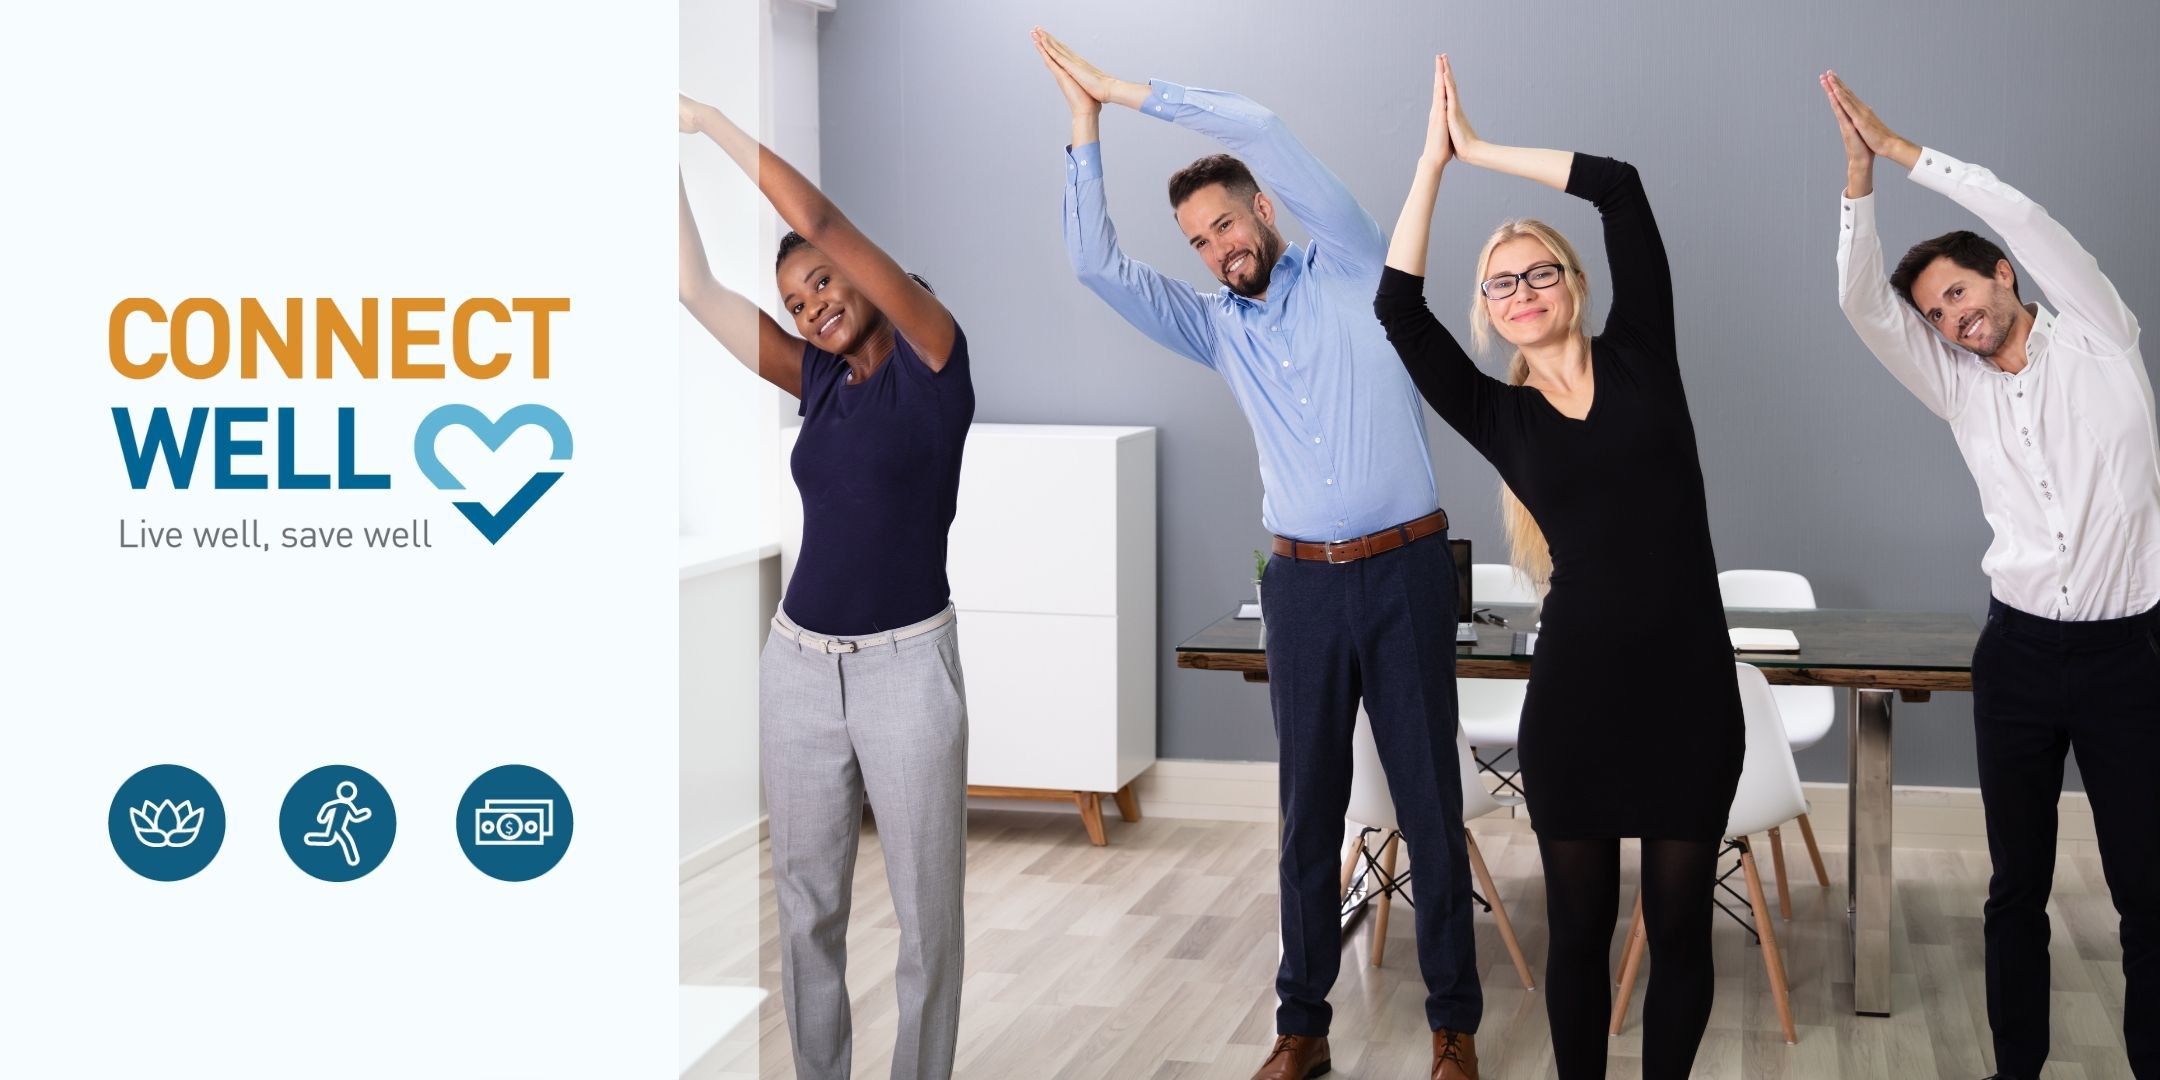 Group of businesspeople doing standing stretches in an office setting